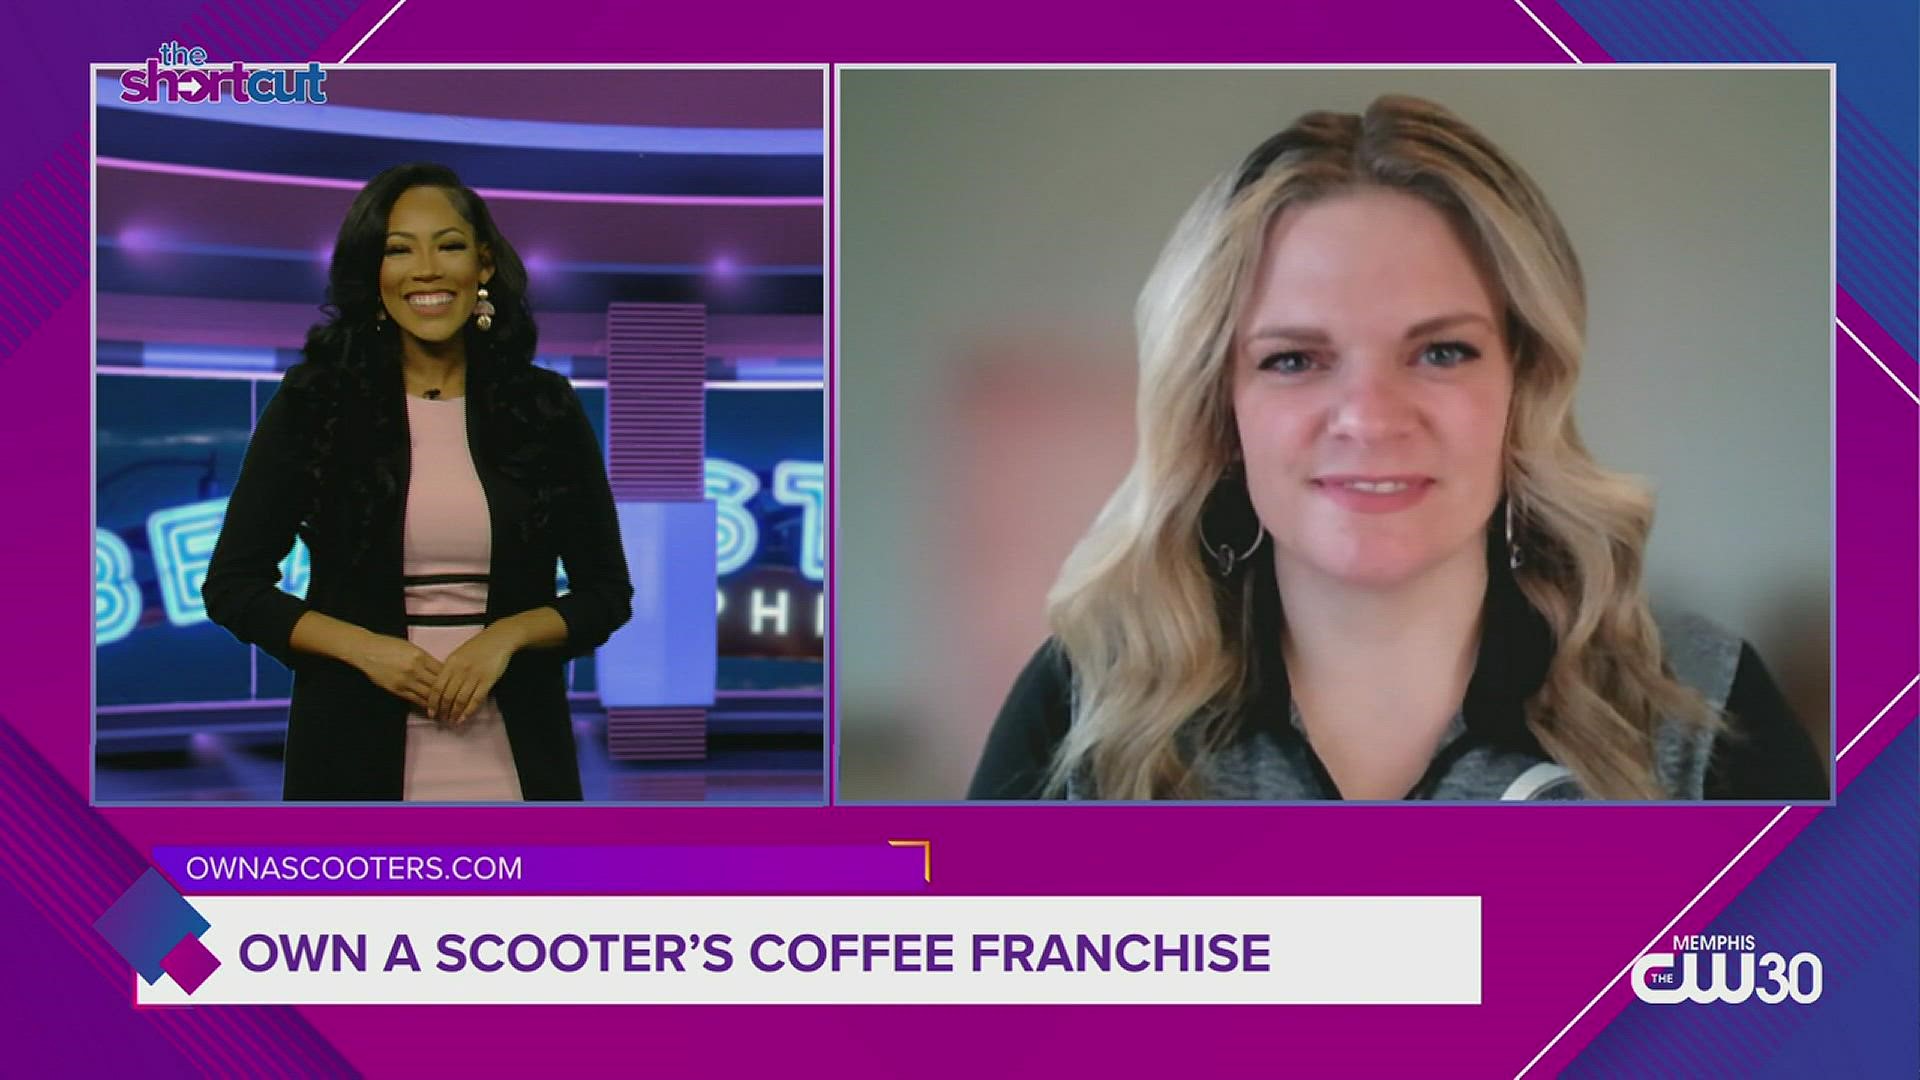 Looking to own your own franchise, but don't know where to start? In that case, find out why owning a Scooter's Coffee may be your next best investment right here!